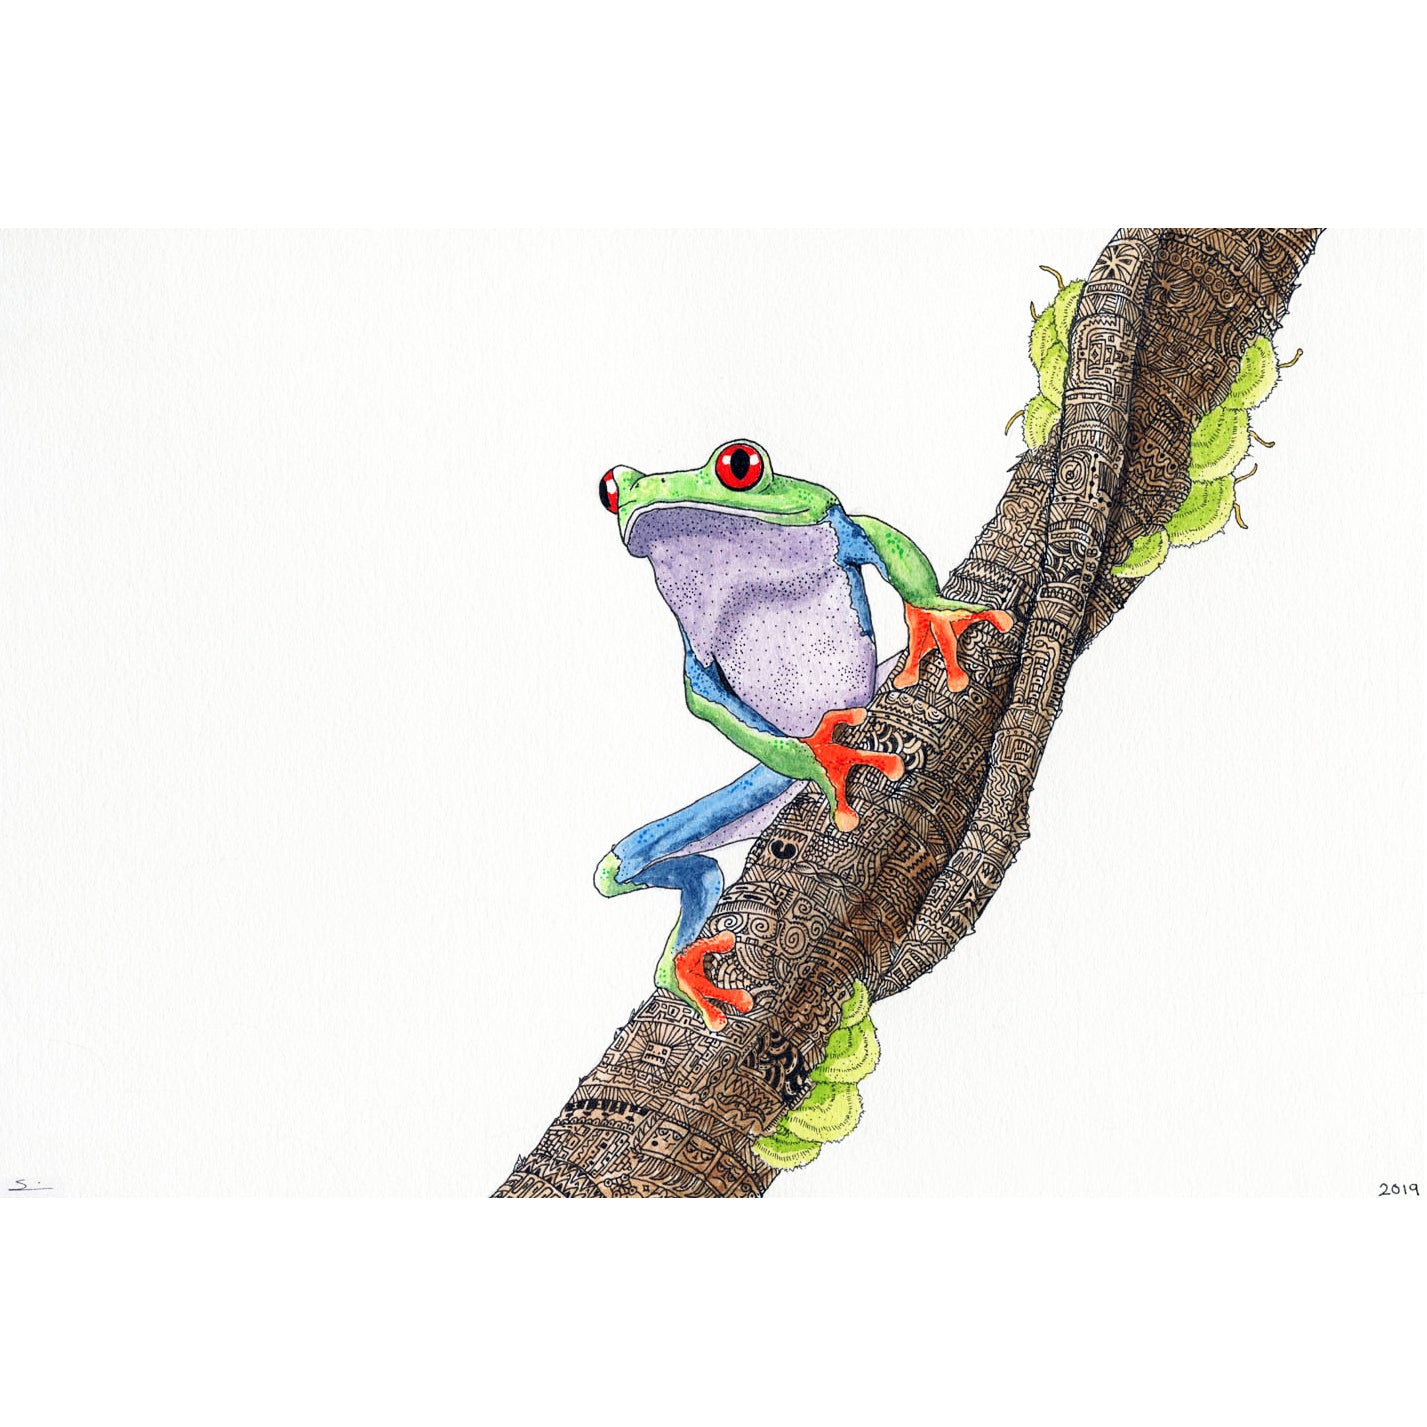 Limited Edition Print "Tree Frog"